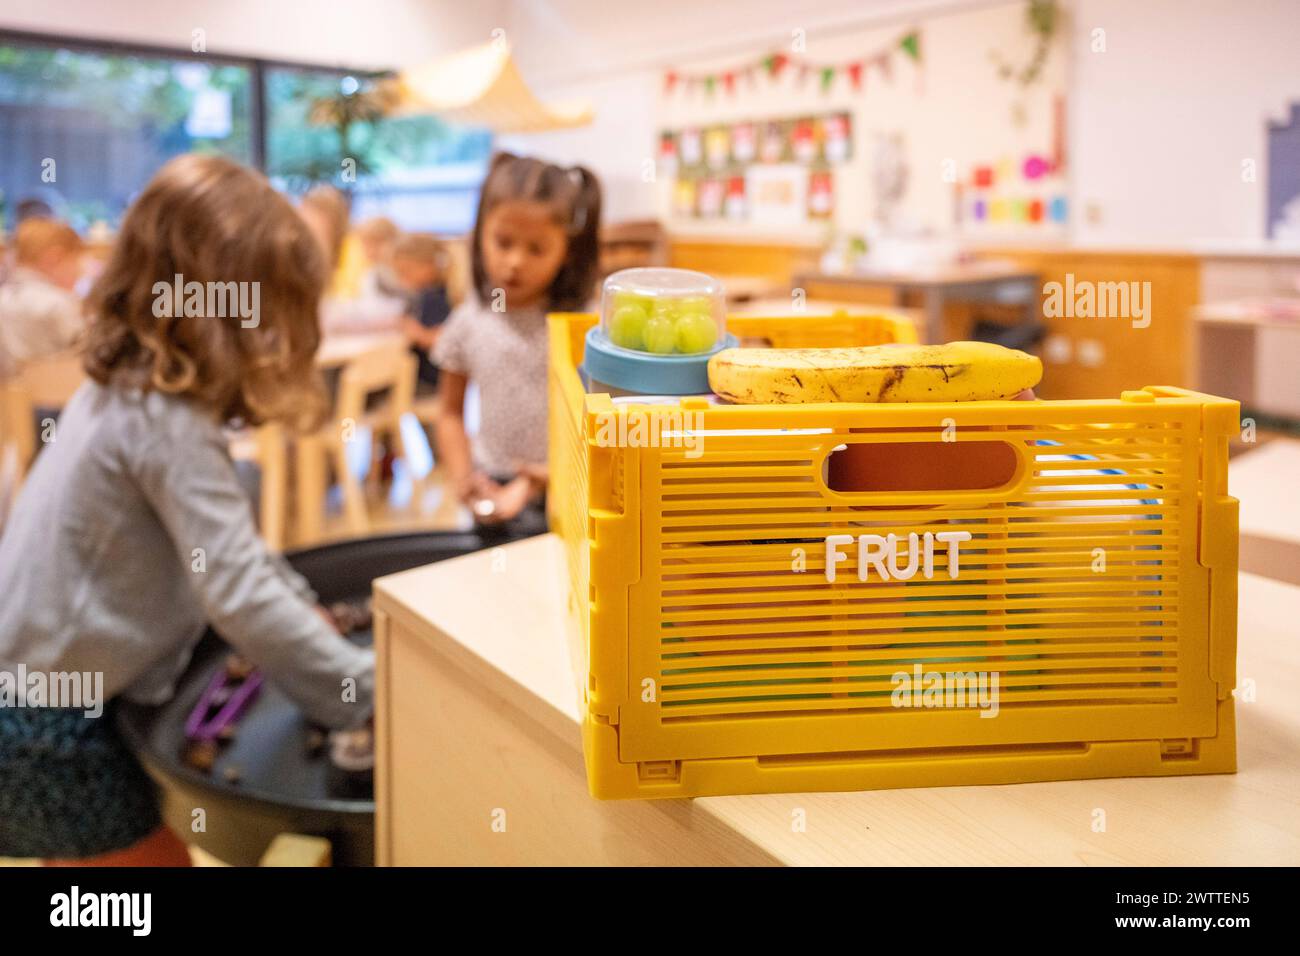 Children engaging in playtime activities in a bright classroom setting Stock Photo